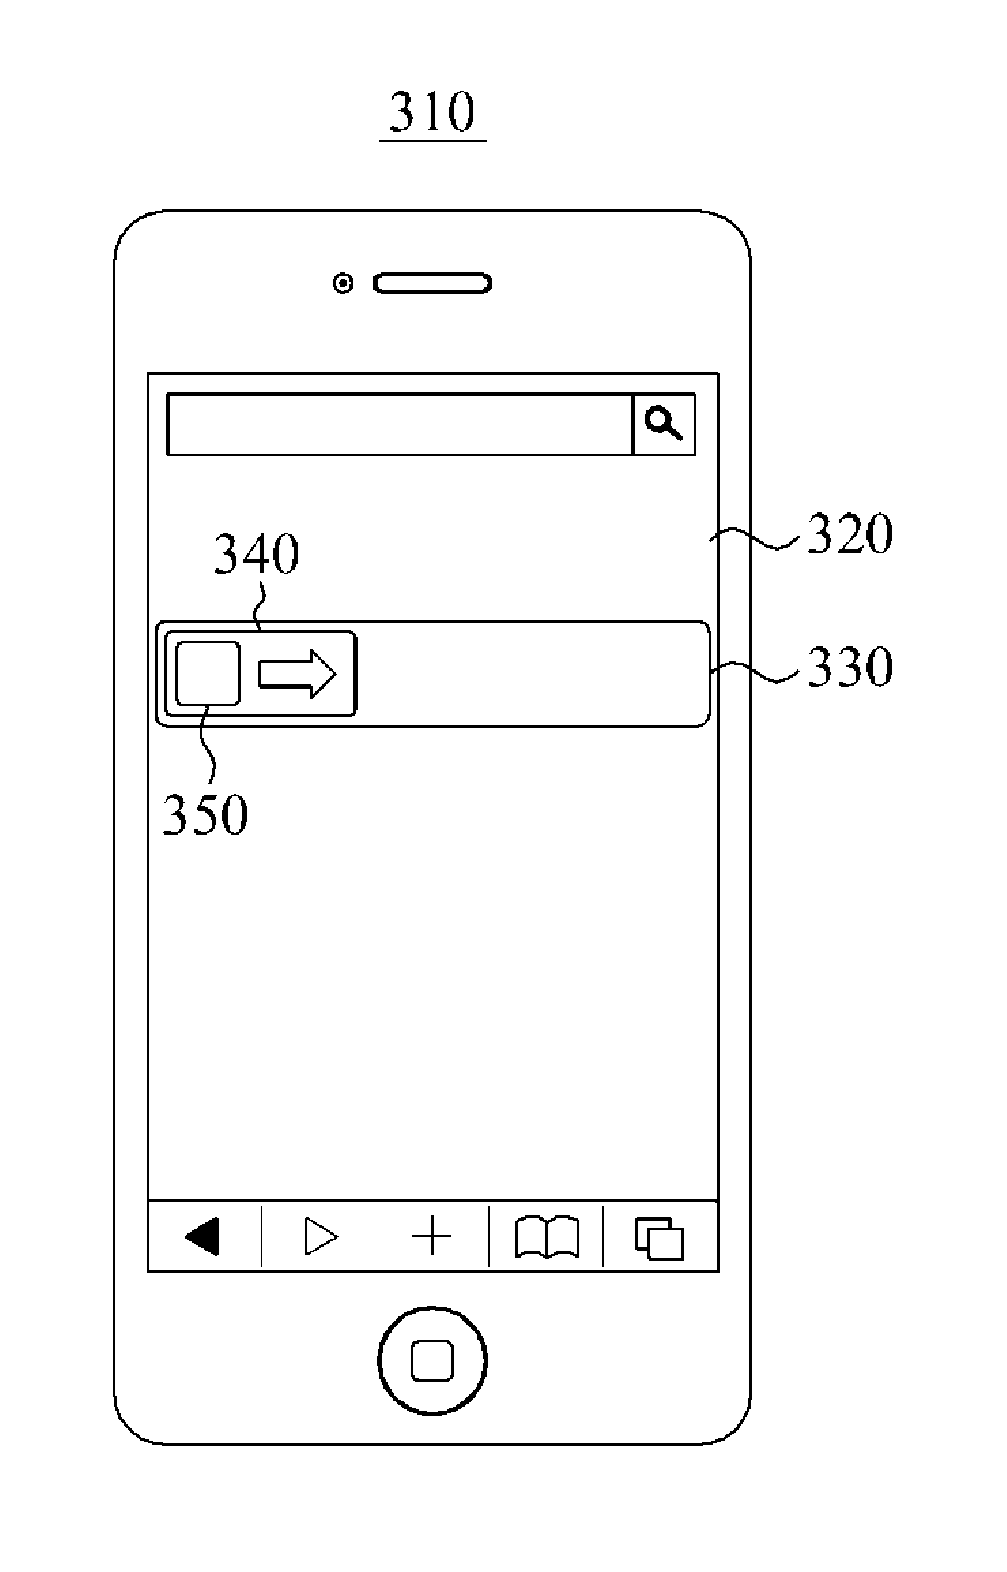 Advertisement providing system and method for providing mobile display advertisement